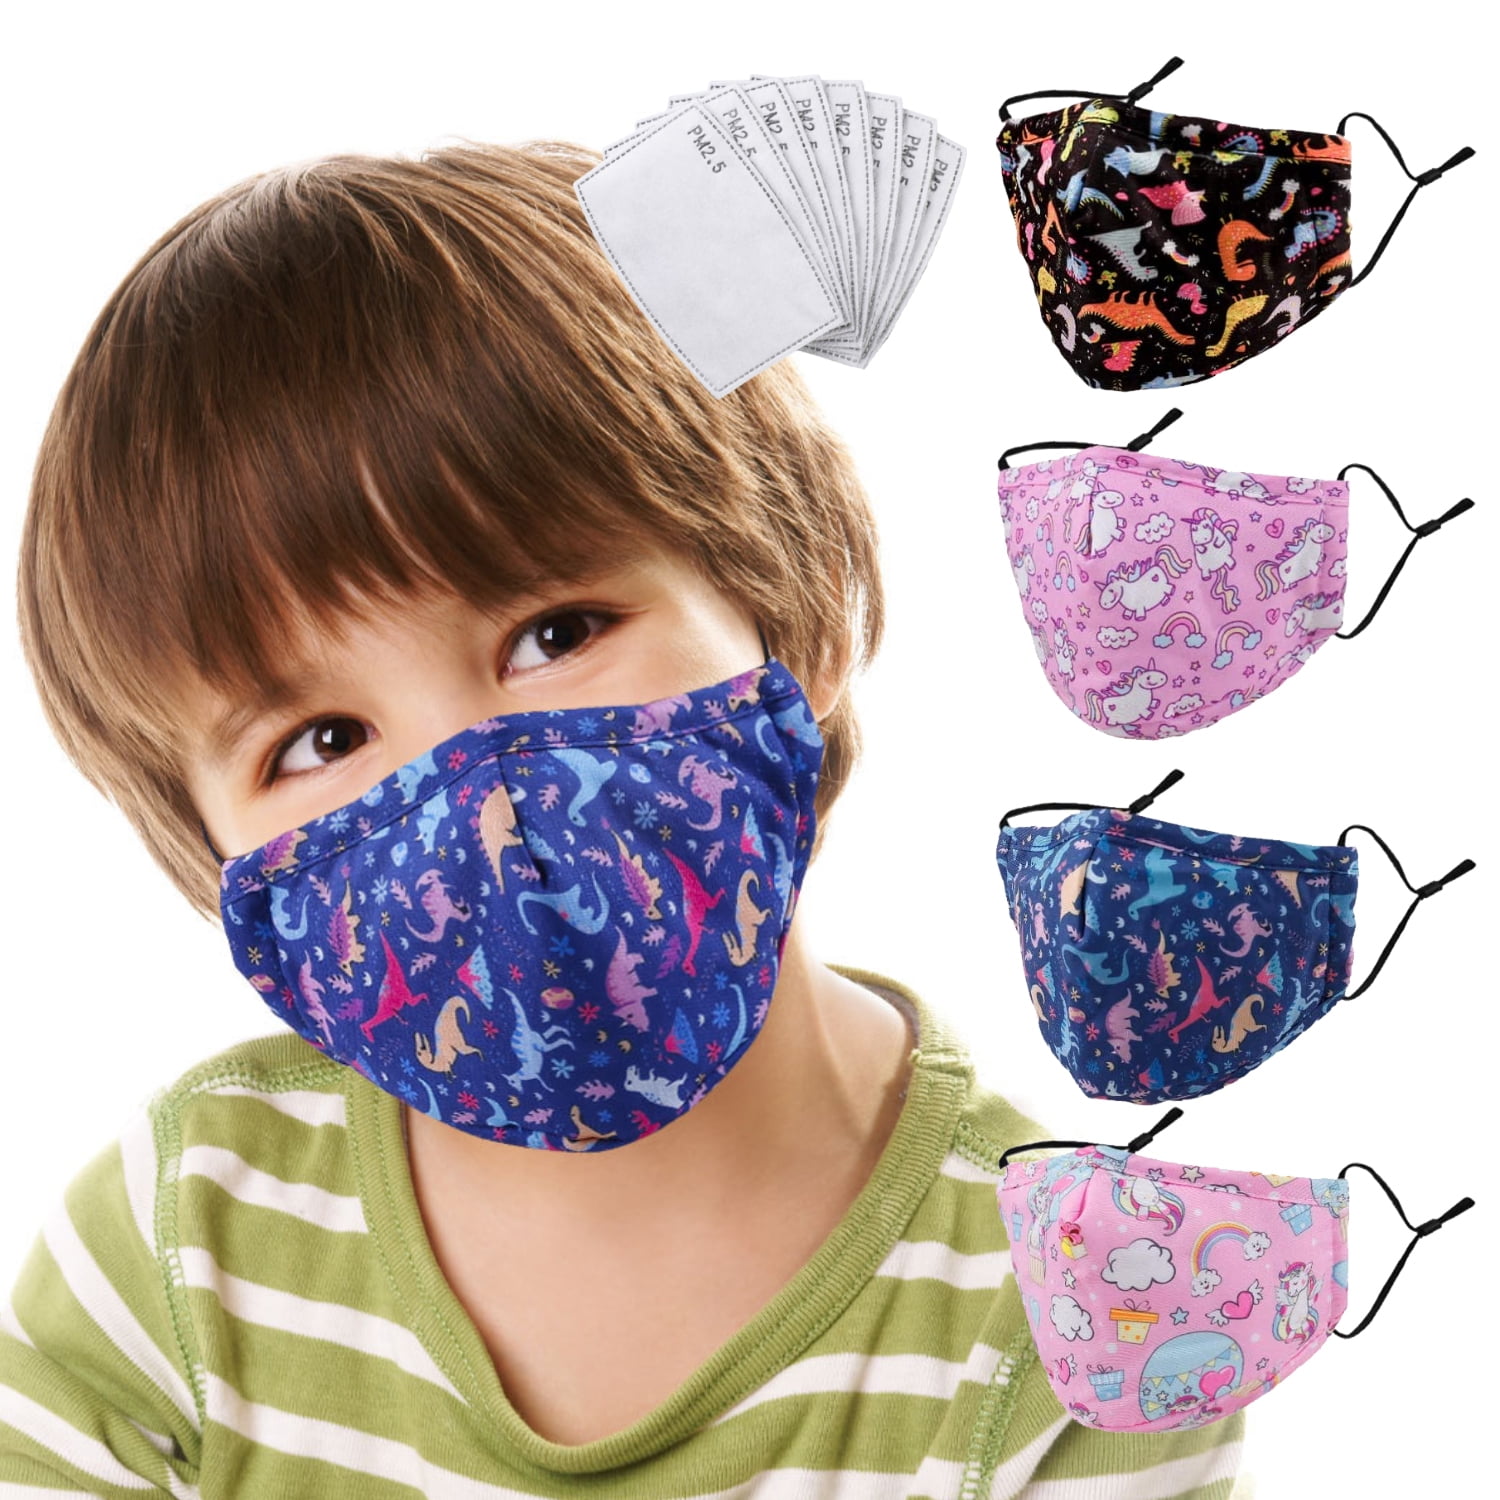 KEoans 1PC Childrens Face Bandanas,Cartoon Face Covering,with Breathing Valve 2 Filter Sheet 